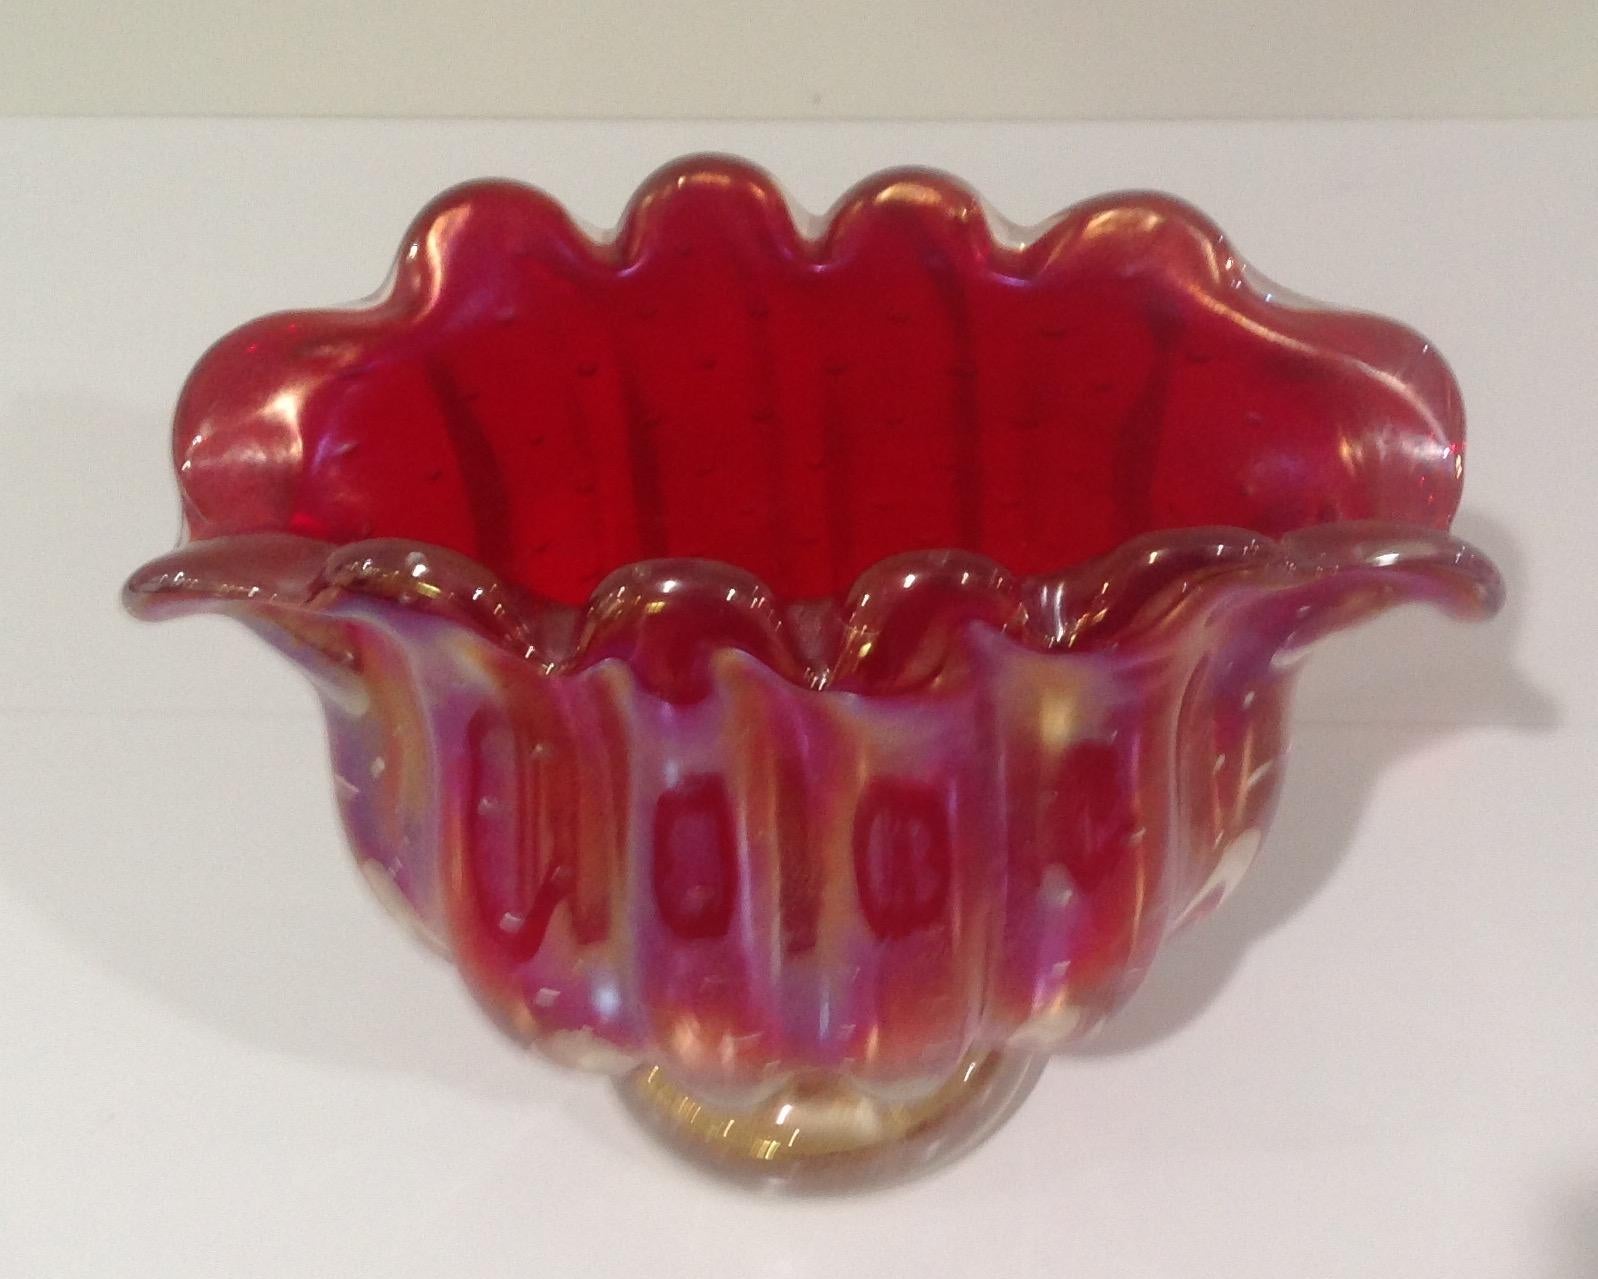 Brilliant red and gold footed Murano irredescent glass vase, circa 1950s.